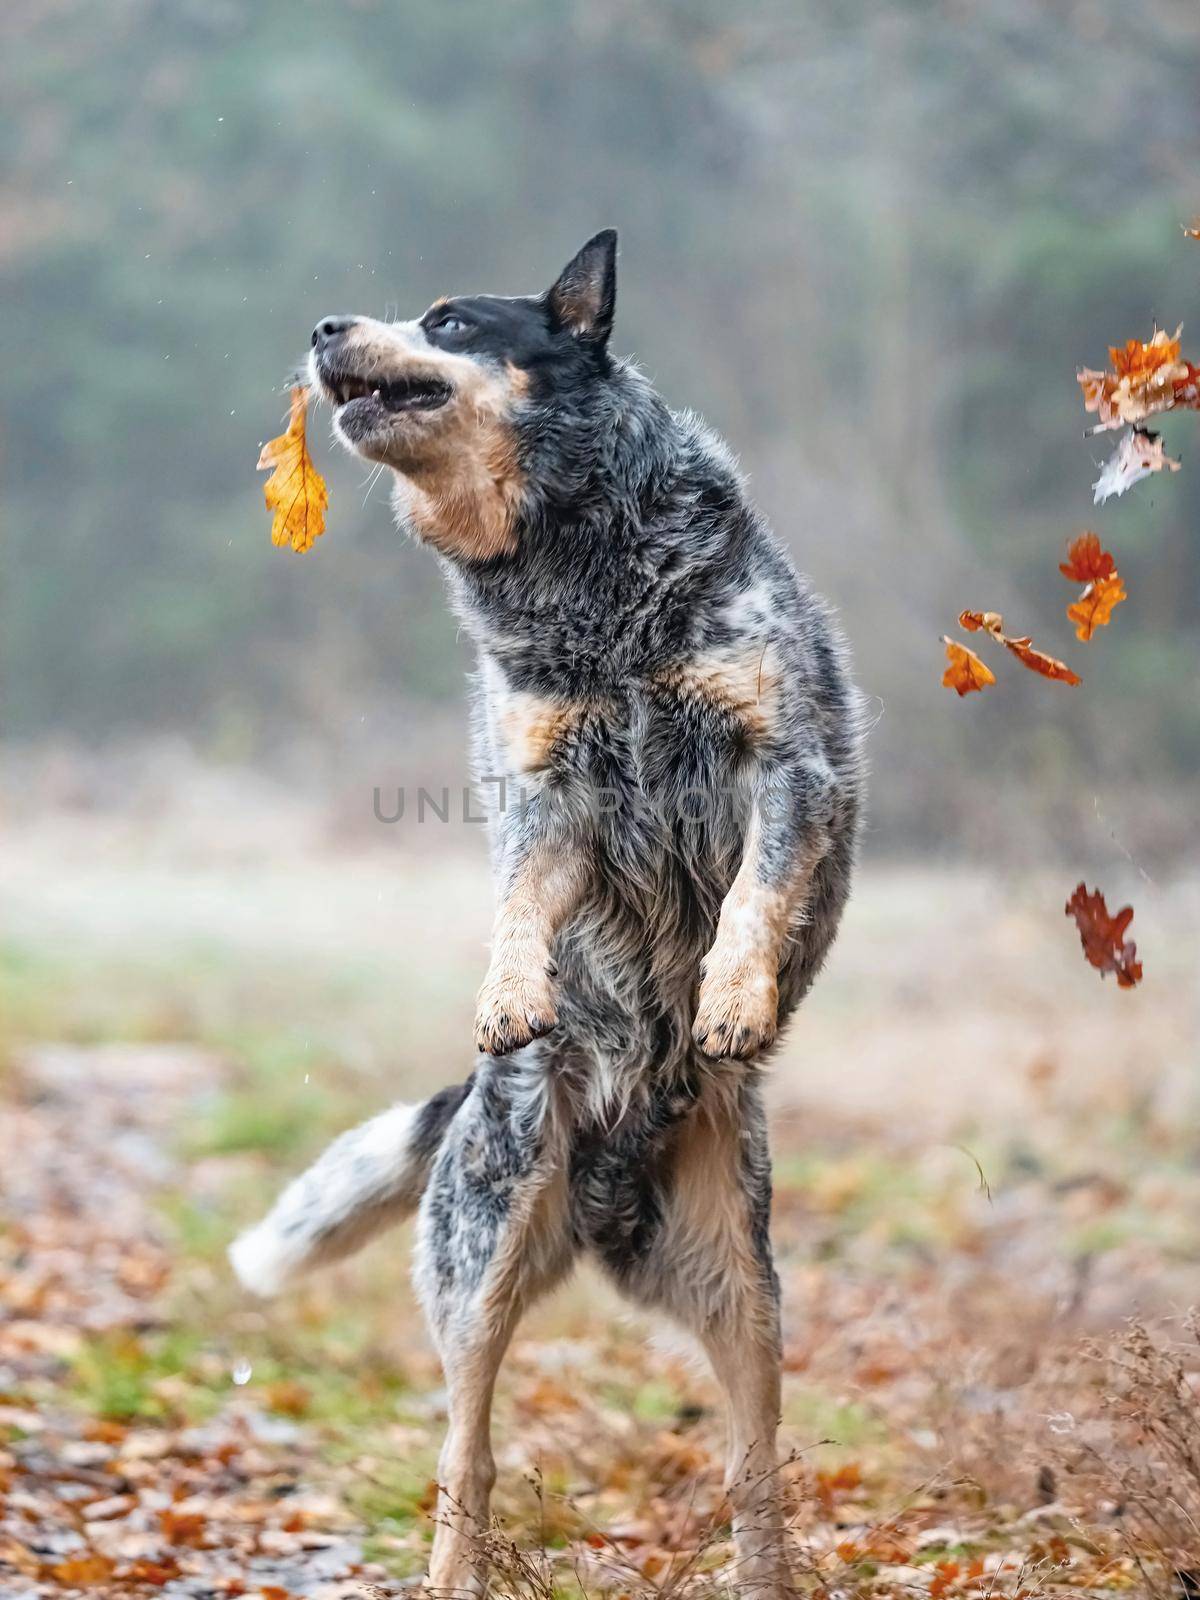 Australian cattle dog in action of catching falling autumn leaves in park.  Flexible muscular body in motion